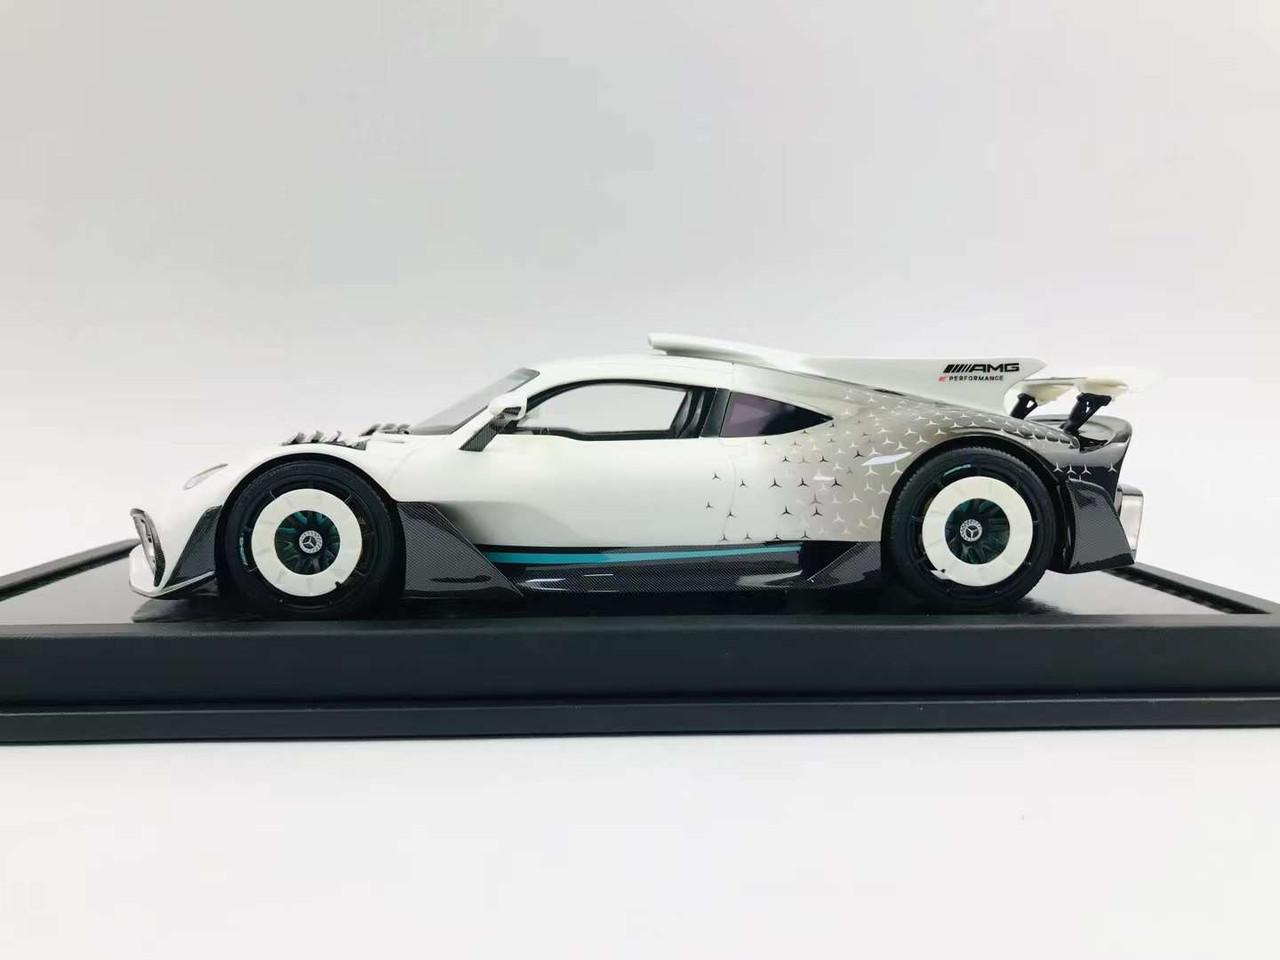 1/18 VIP Scale Models Mercedes-Benz AMG ONE (White & Glow in the Dark Blue) Resin Car Model Limited 30 Pieces